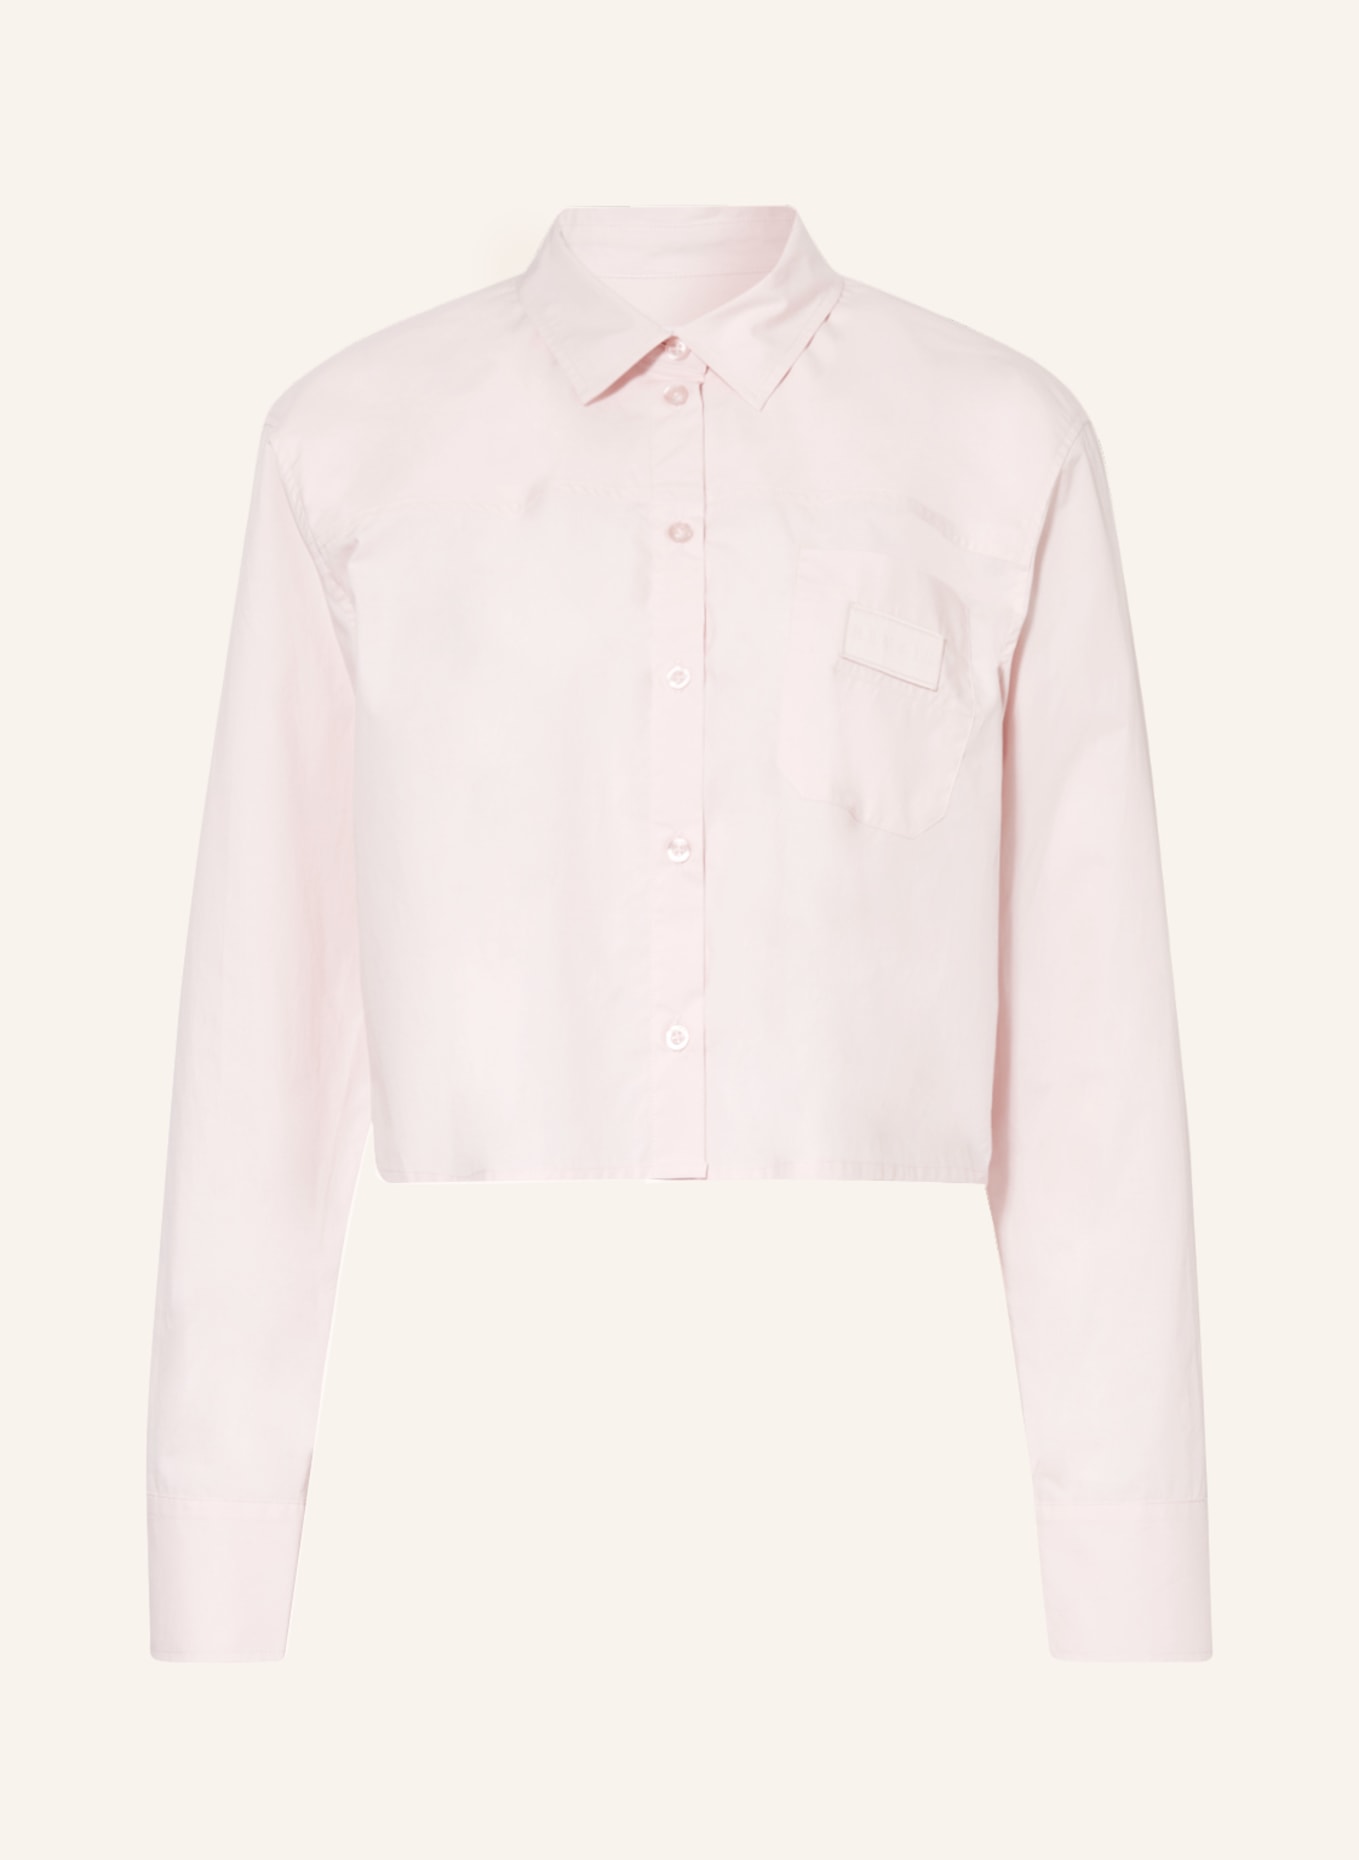 REMAIN Cropped shirt blouse, Color: PINK (Image 1)